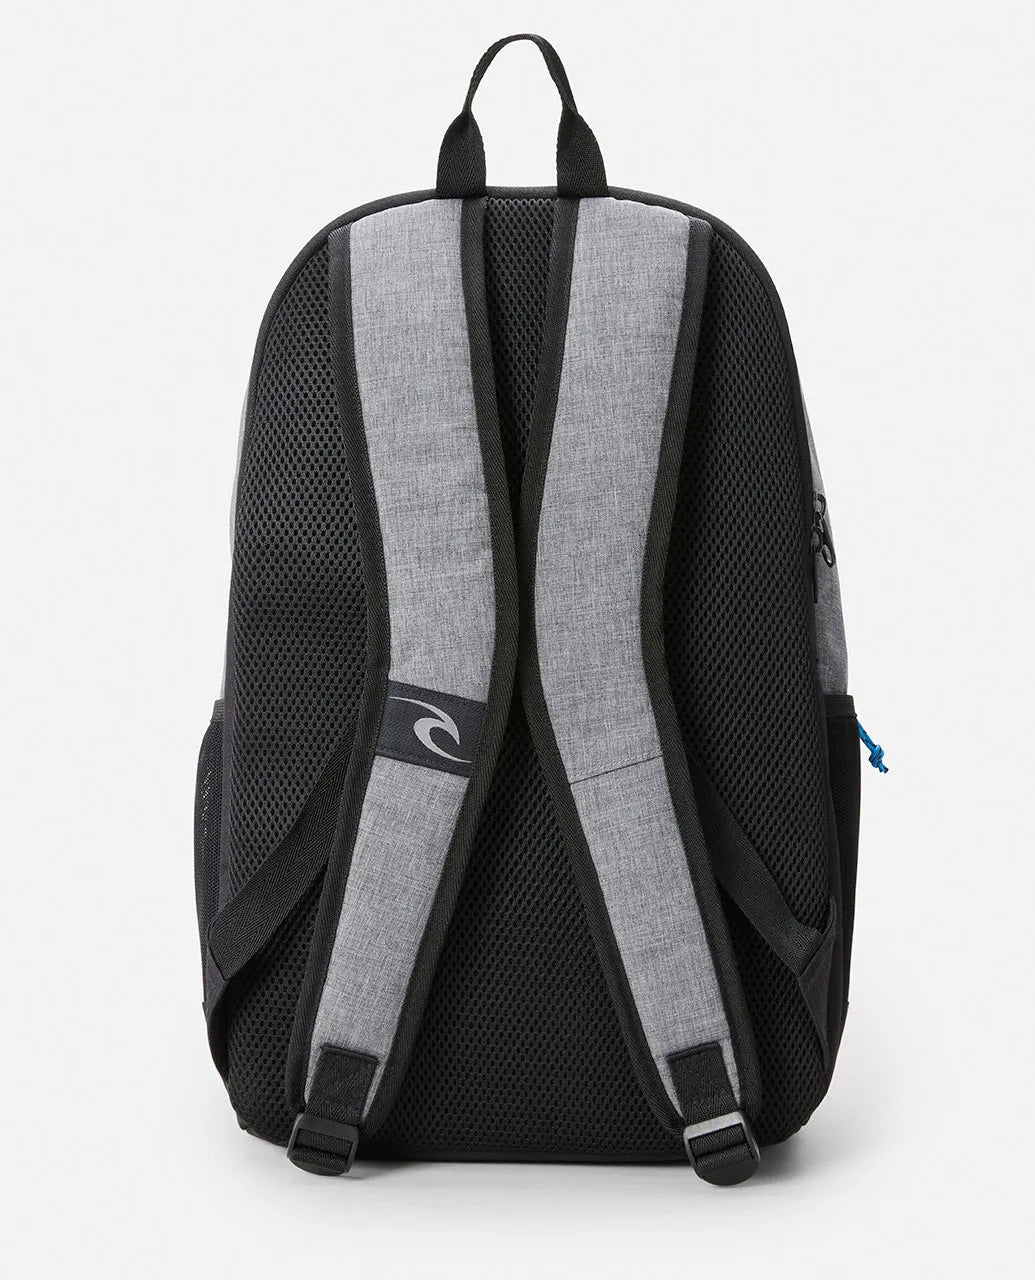 Rip Curl Ozone 30L Icons of Surf Backpack Bags & Packs RIPCURL MENS 